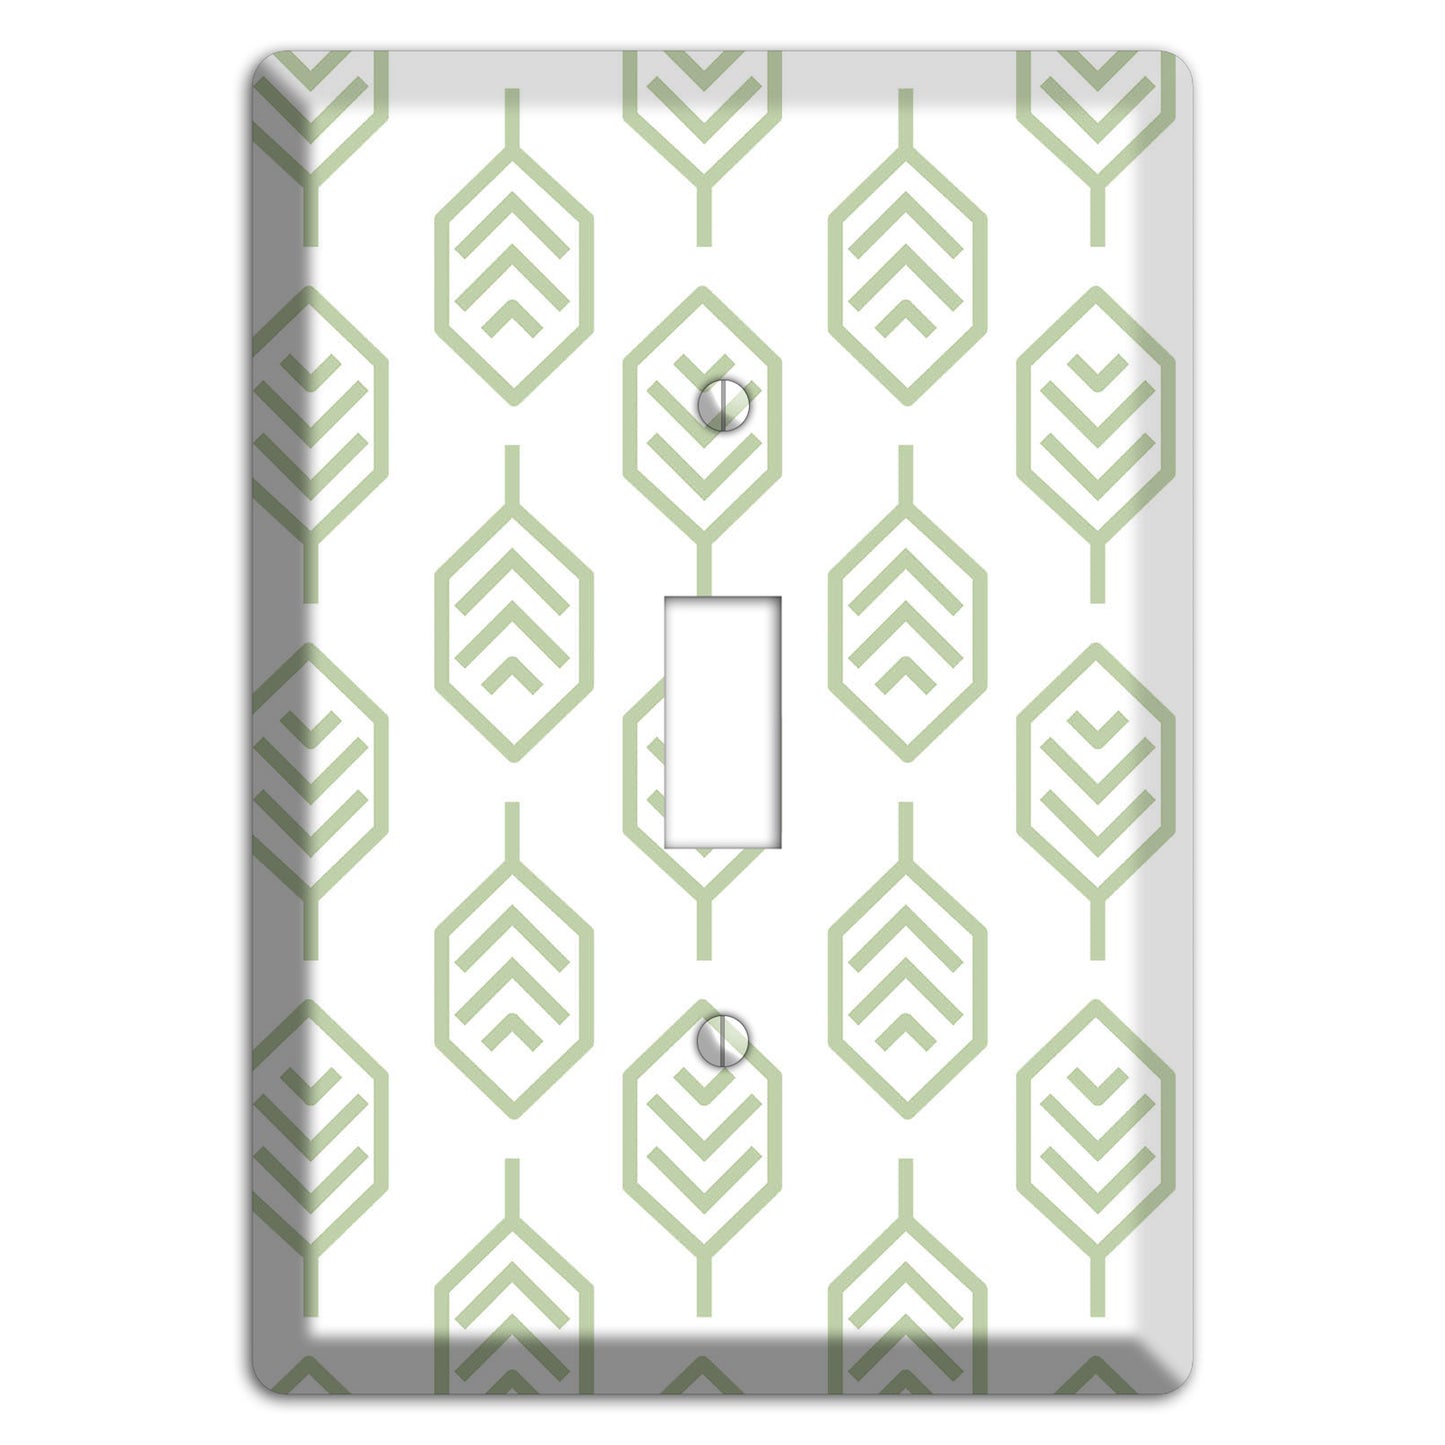 Leaves Style S Cover Plates